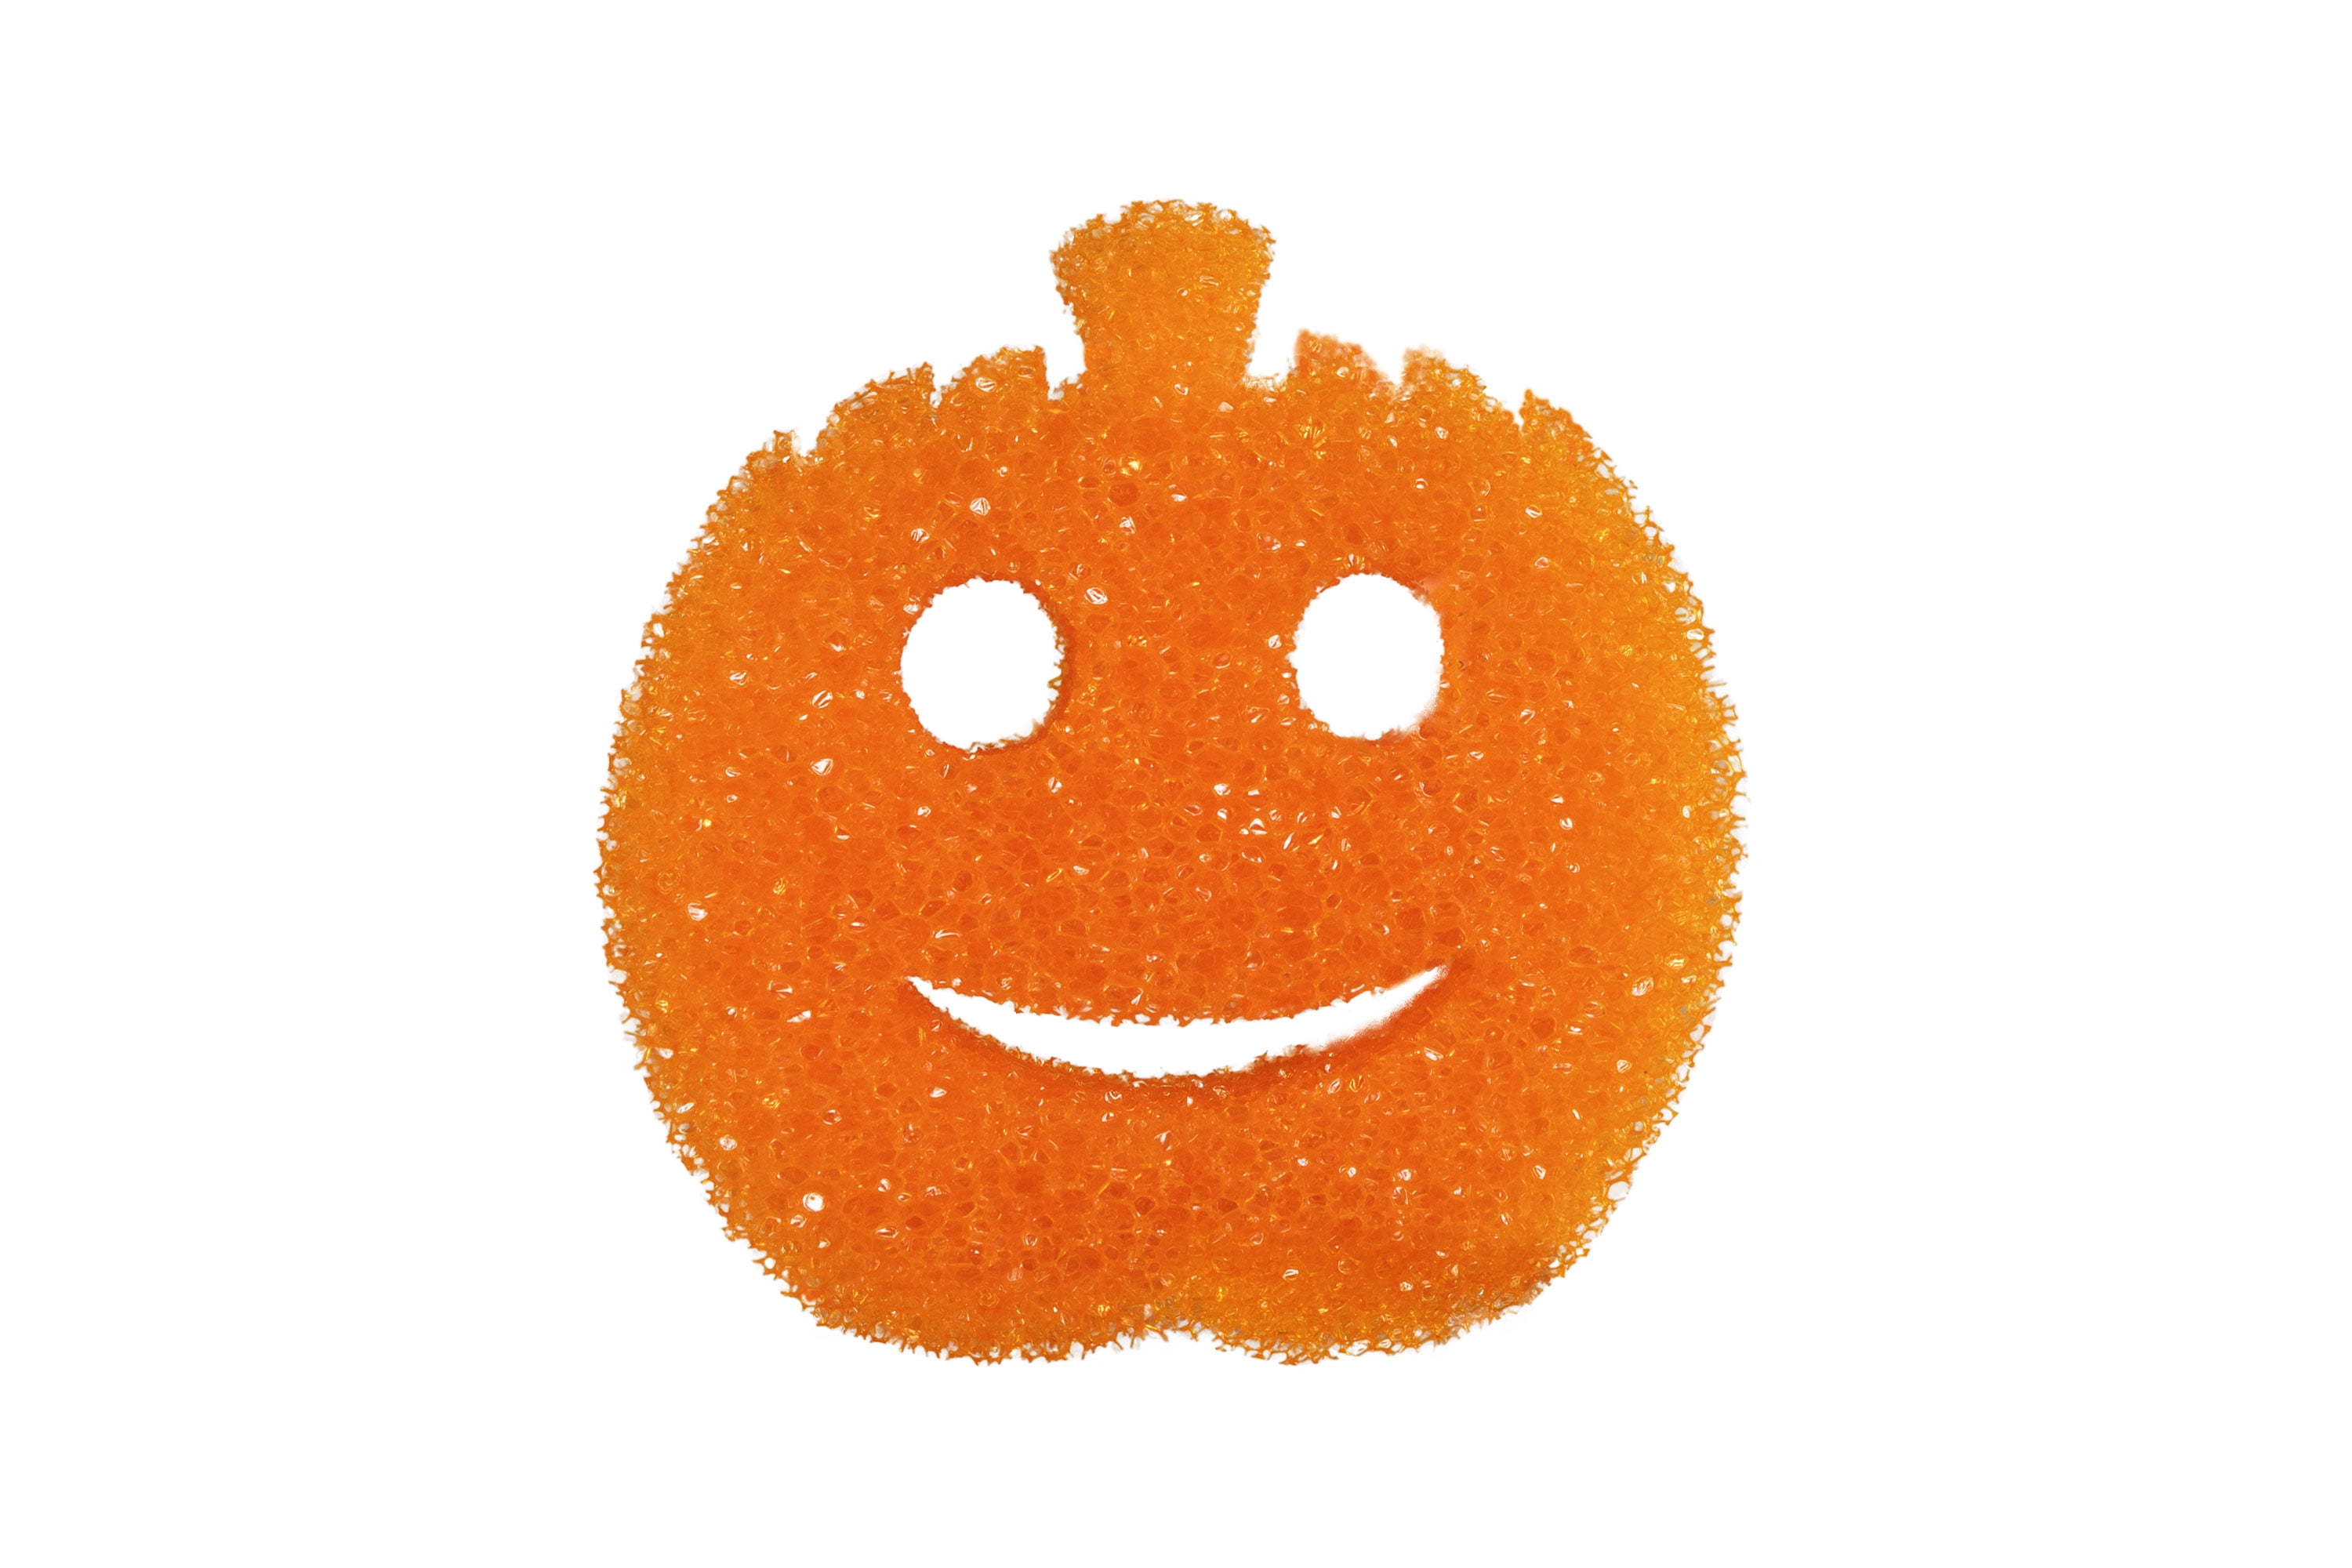 Scrub Daddy Halloween Sponge - Non-Scratch Scrubbers for Dishes and Home -  White Ghost, 1ct Sponge